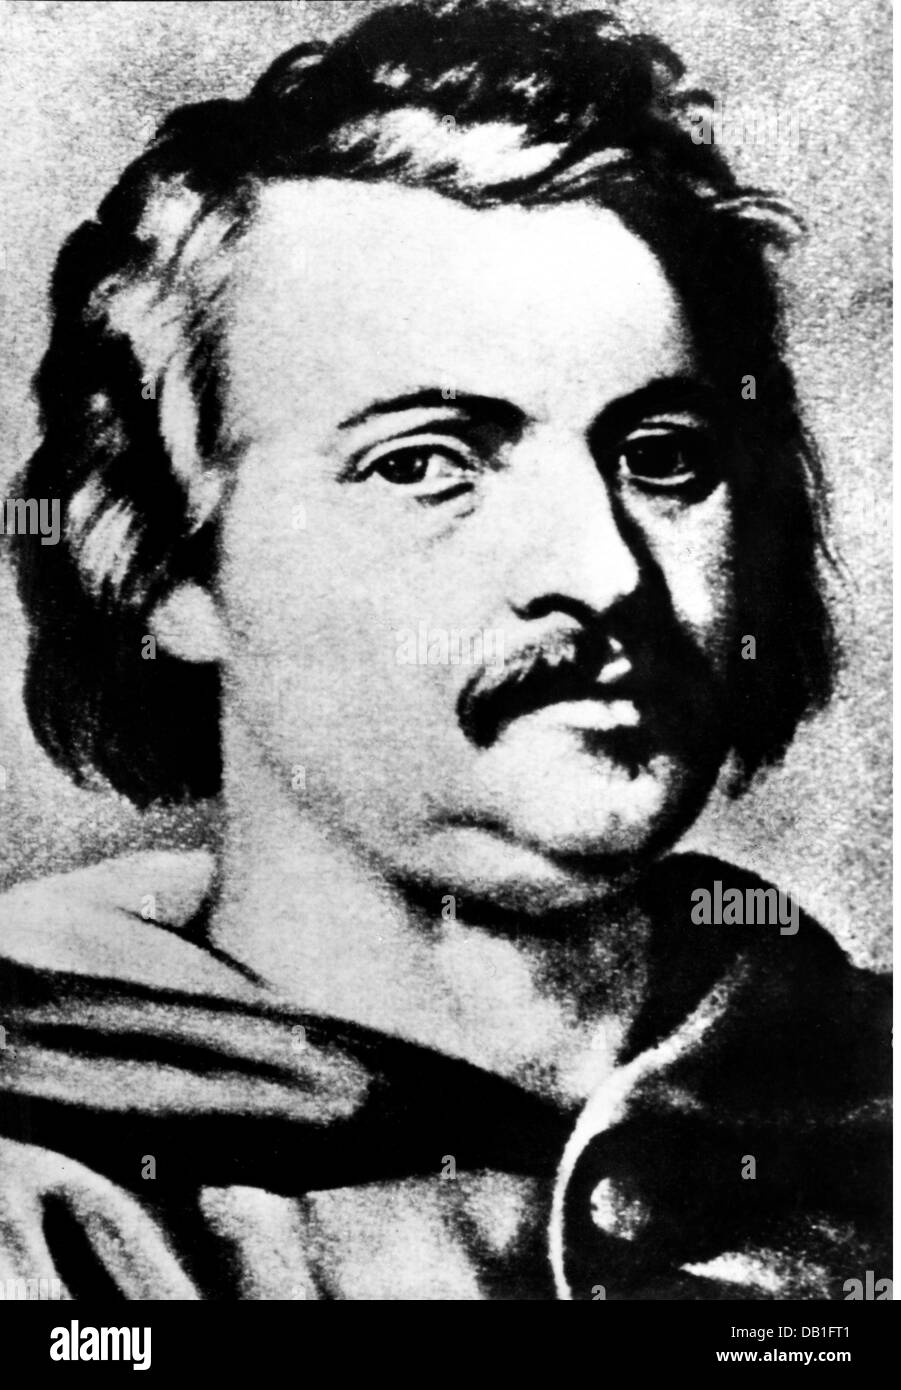 Balzac, Honore de, 20.5.1799 - 18.8.1850, French author / writer, portrait, after painting by Louis Boulanger (1807 - 1867), drawing, 19th century, Artist's Copyright has not to be cleared Stock Photo